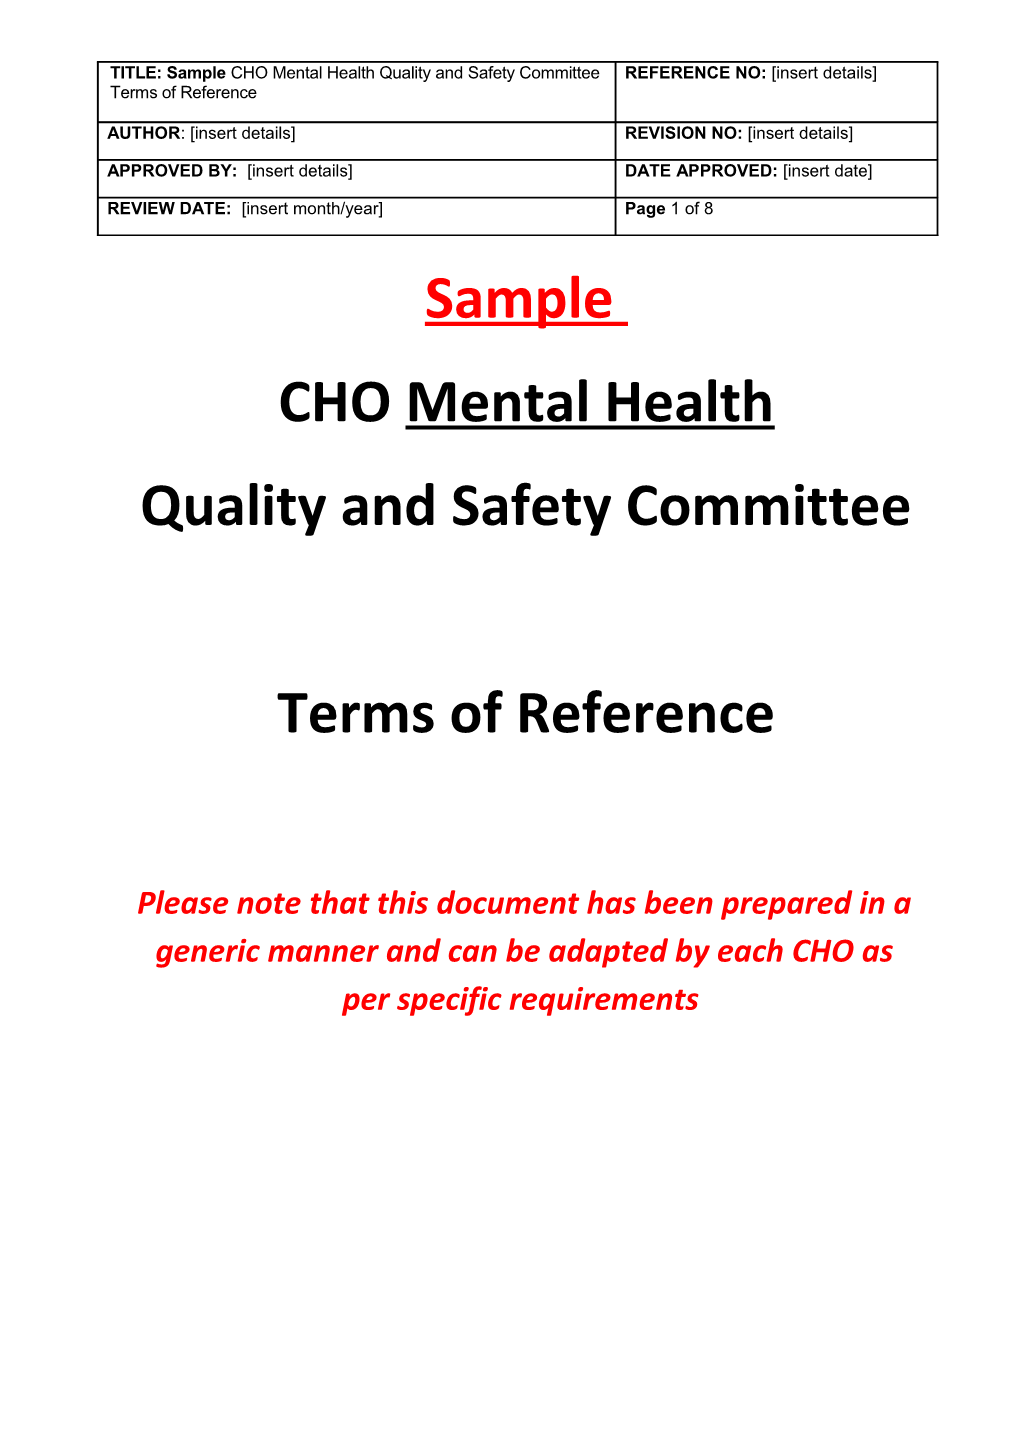 CHO Quality and Safety Committee For